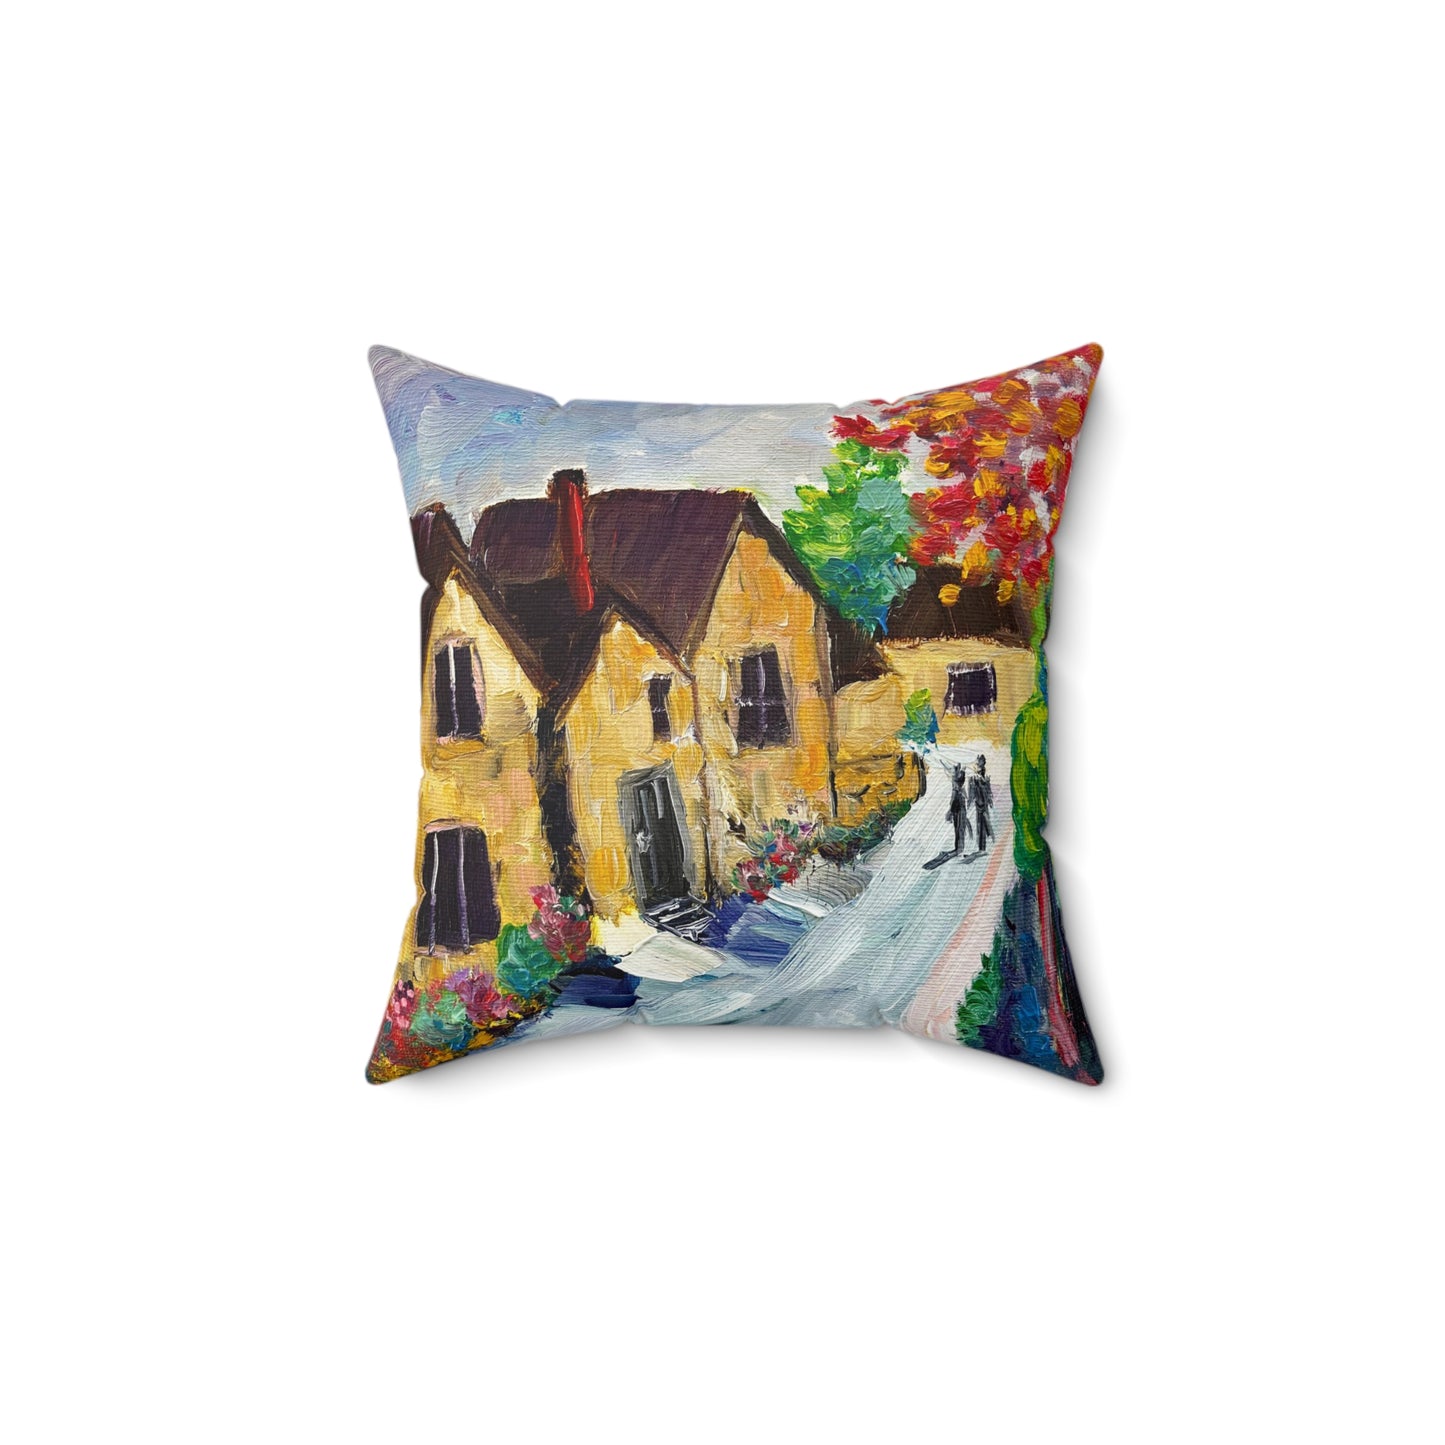 Charming Medieval Cottages Cotswolds Village Indoor Spun Polyester Square Pillow